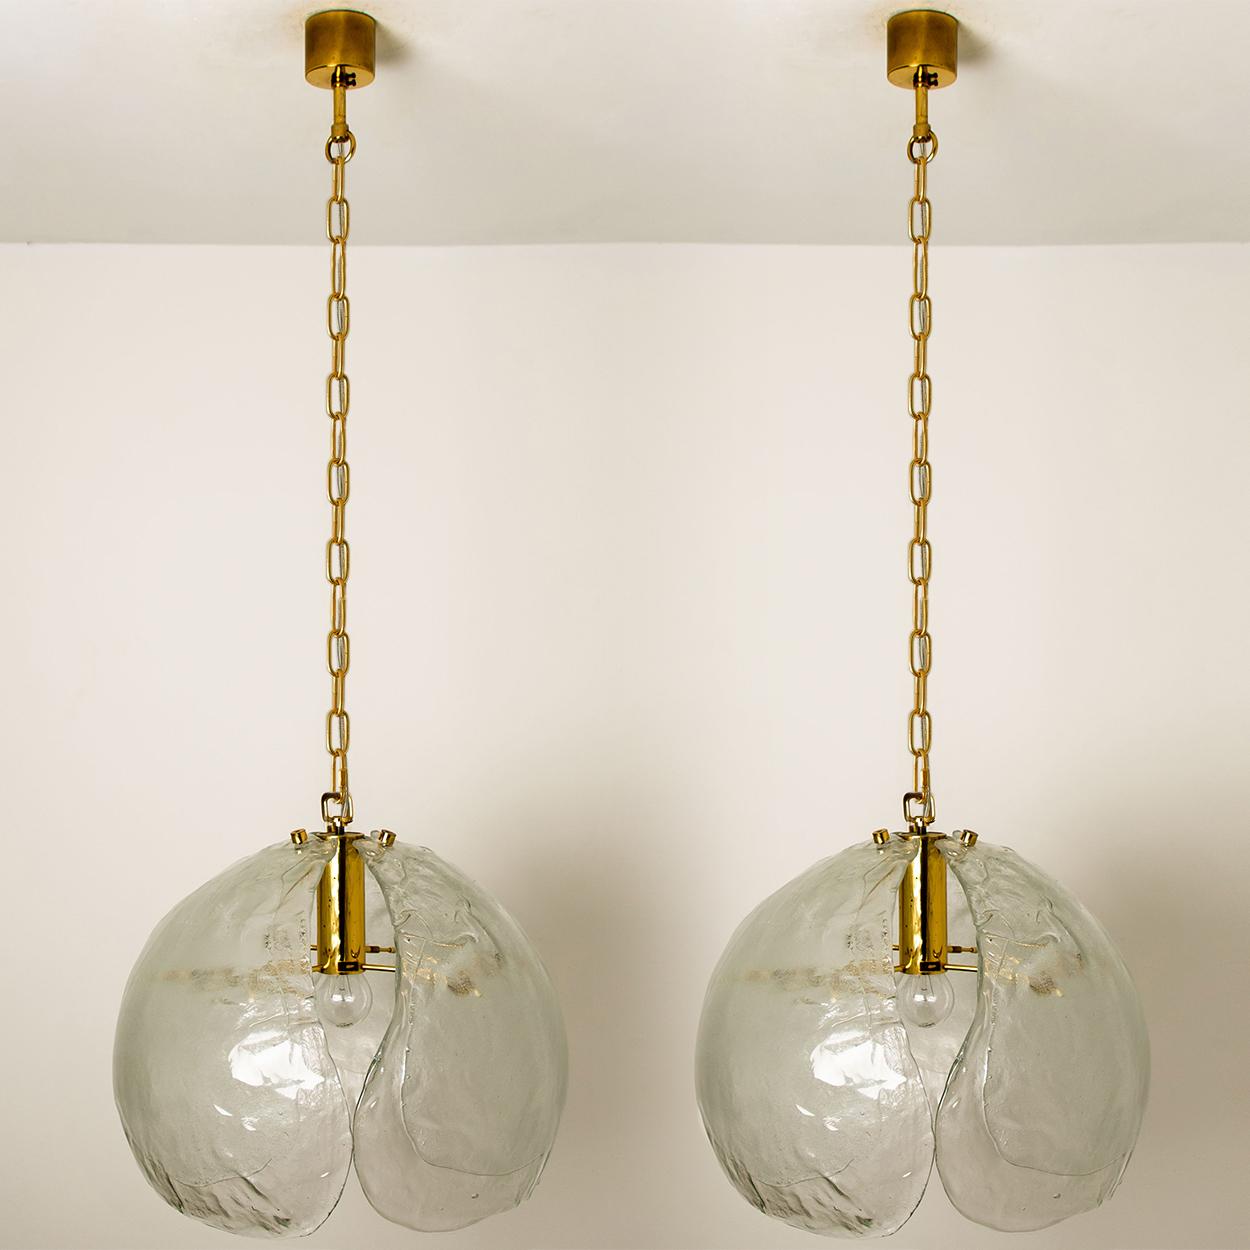 European 1 of the 2 Kalmar Style Pendant Lights, Clear Glass and Brass, 1970s For Sale